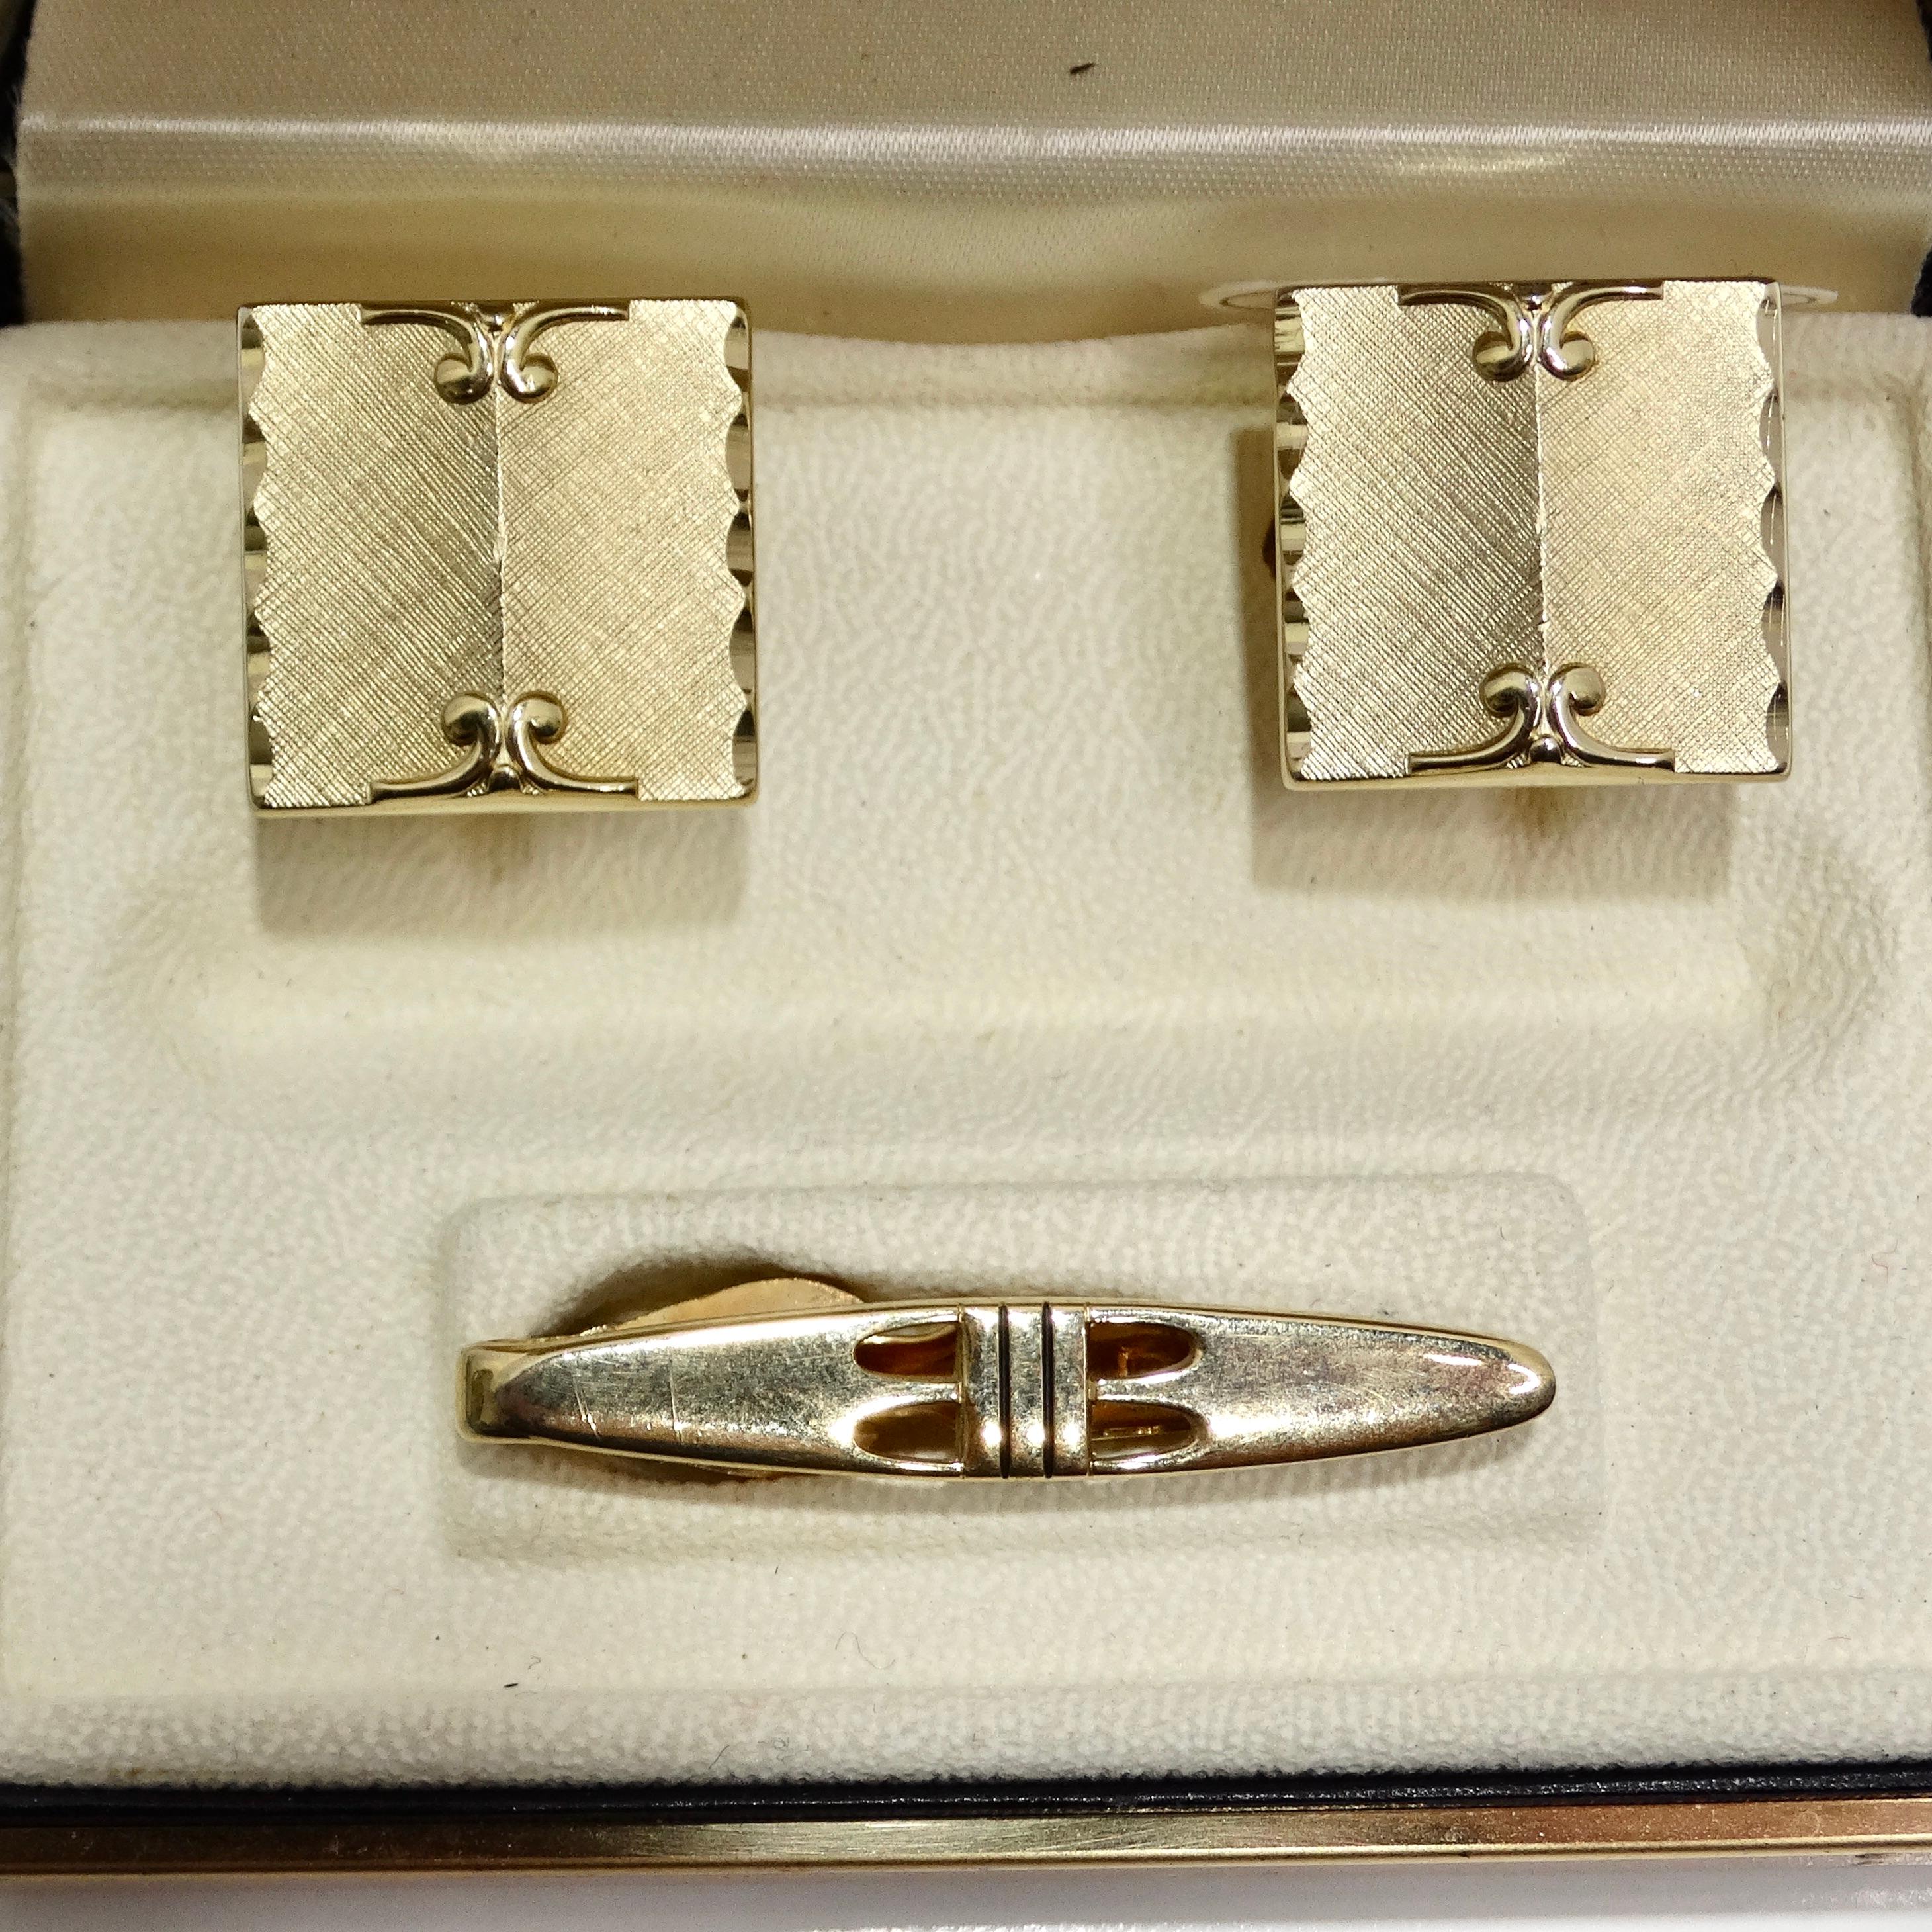 Introducing the 18K Gold Plated Vintage Cuff Links and Tie Clip Set, a sophisticated accessory set from the 1960s that adds a touch of luxury and elegance to any formal ensemble. This set features cuff links and a tie clip, both crafted with 18k